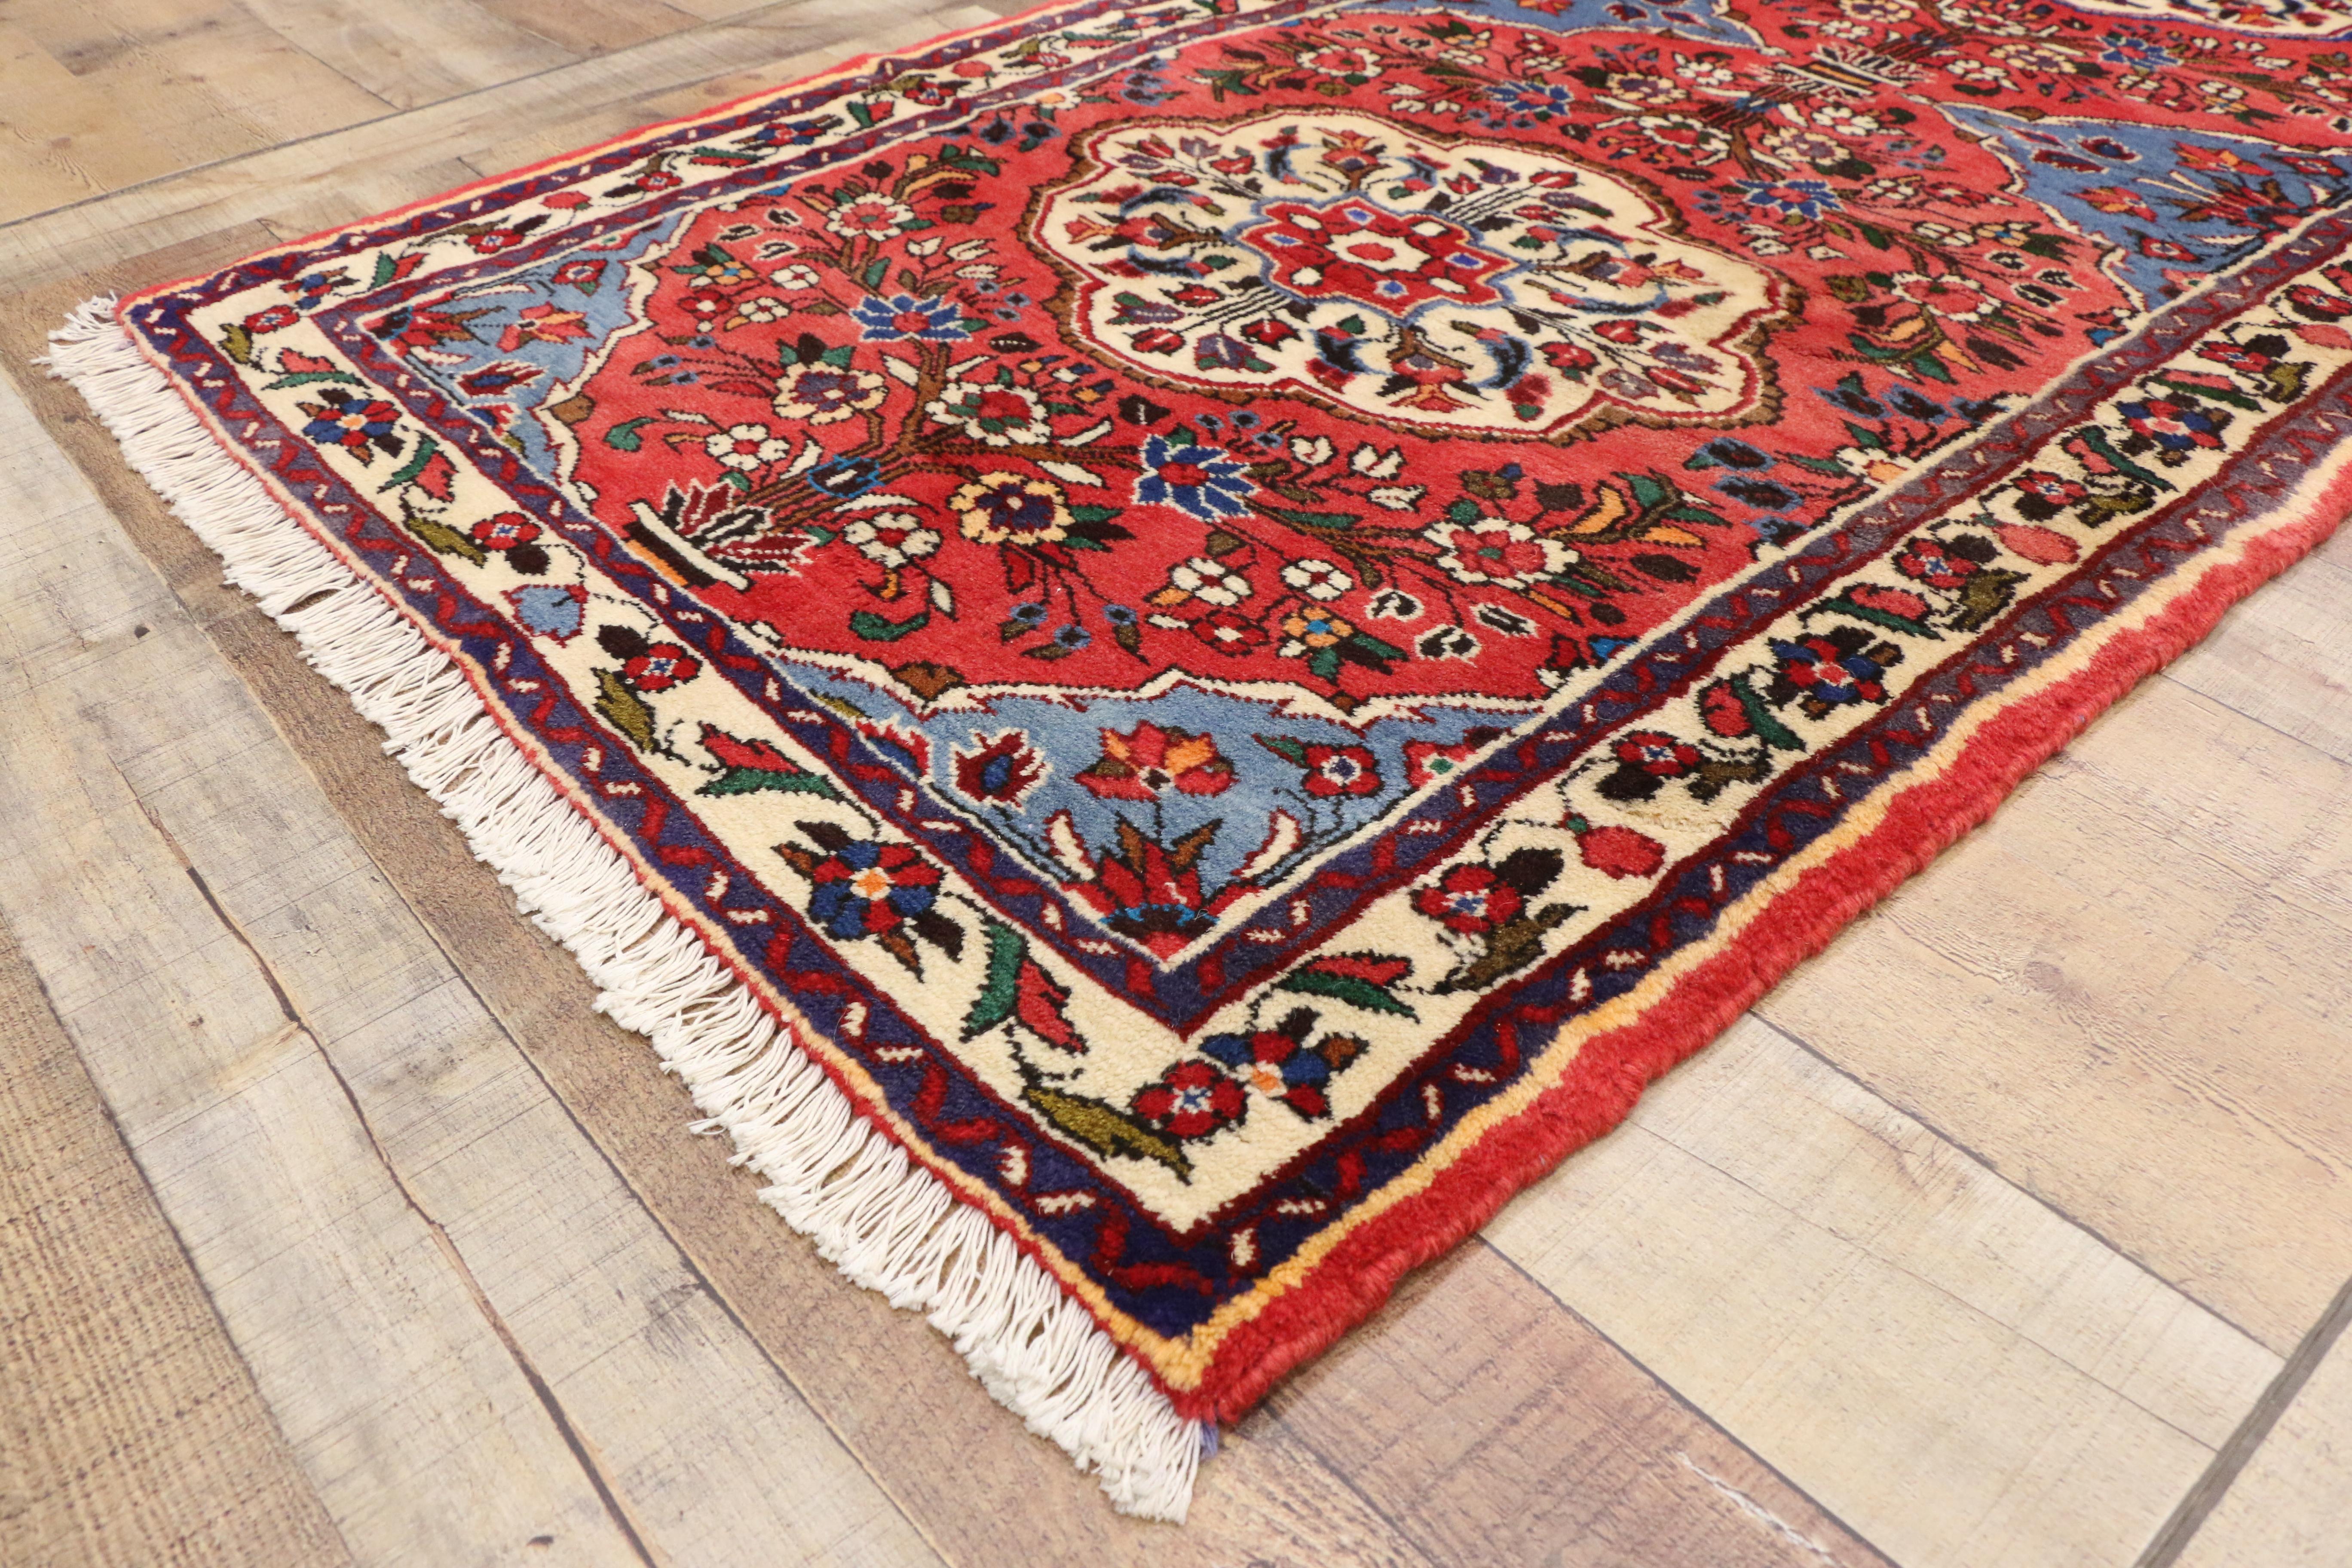 60194 Vintage Persian Roudbar Runner with Jacobean Style, Persian Hallway Runner. This hand-knotted wool vintage Persian Roudbar runner features three cusped medallions filled with eight-point amulets blooming with flowers surrounded by an all-over